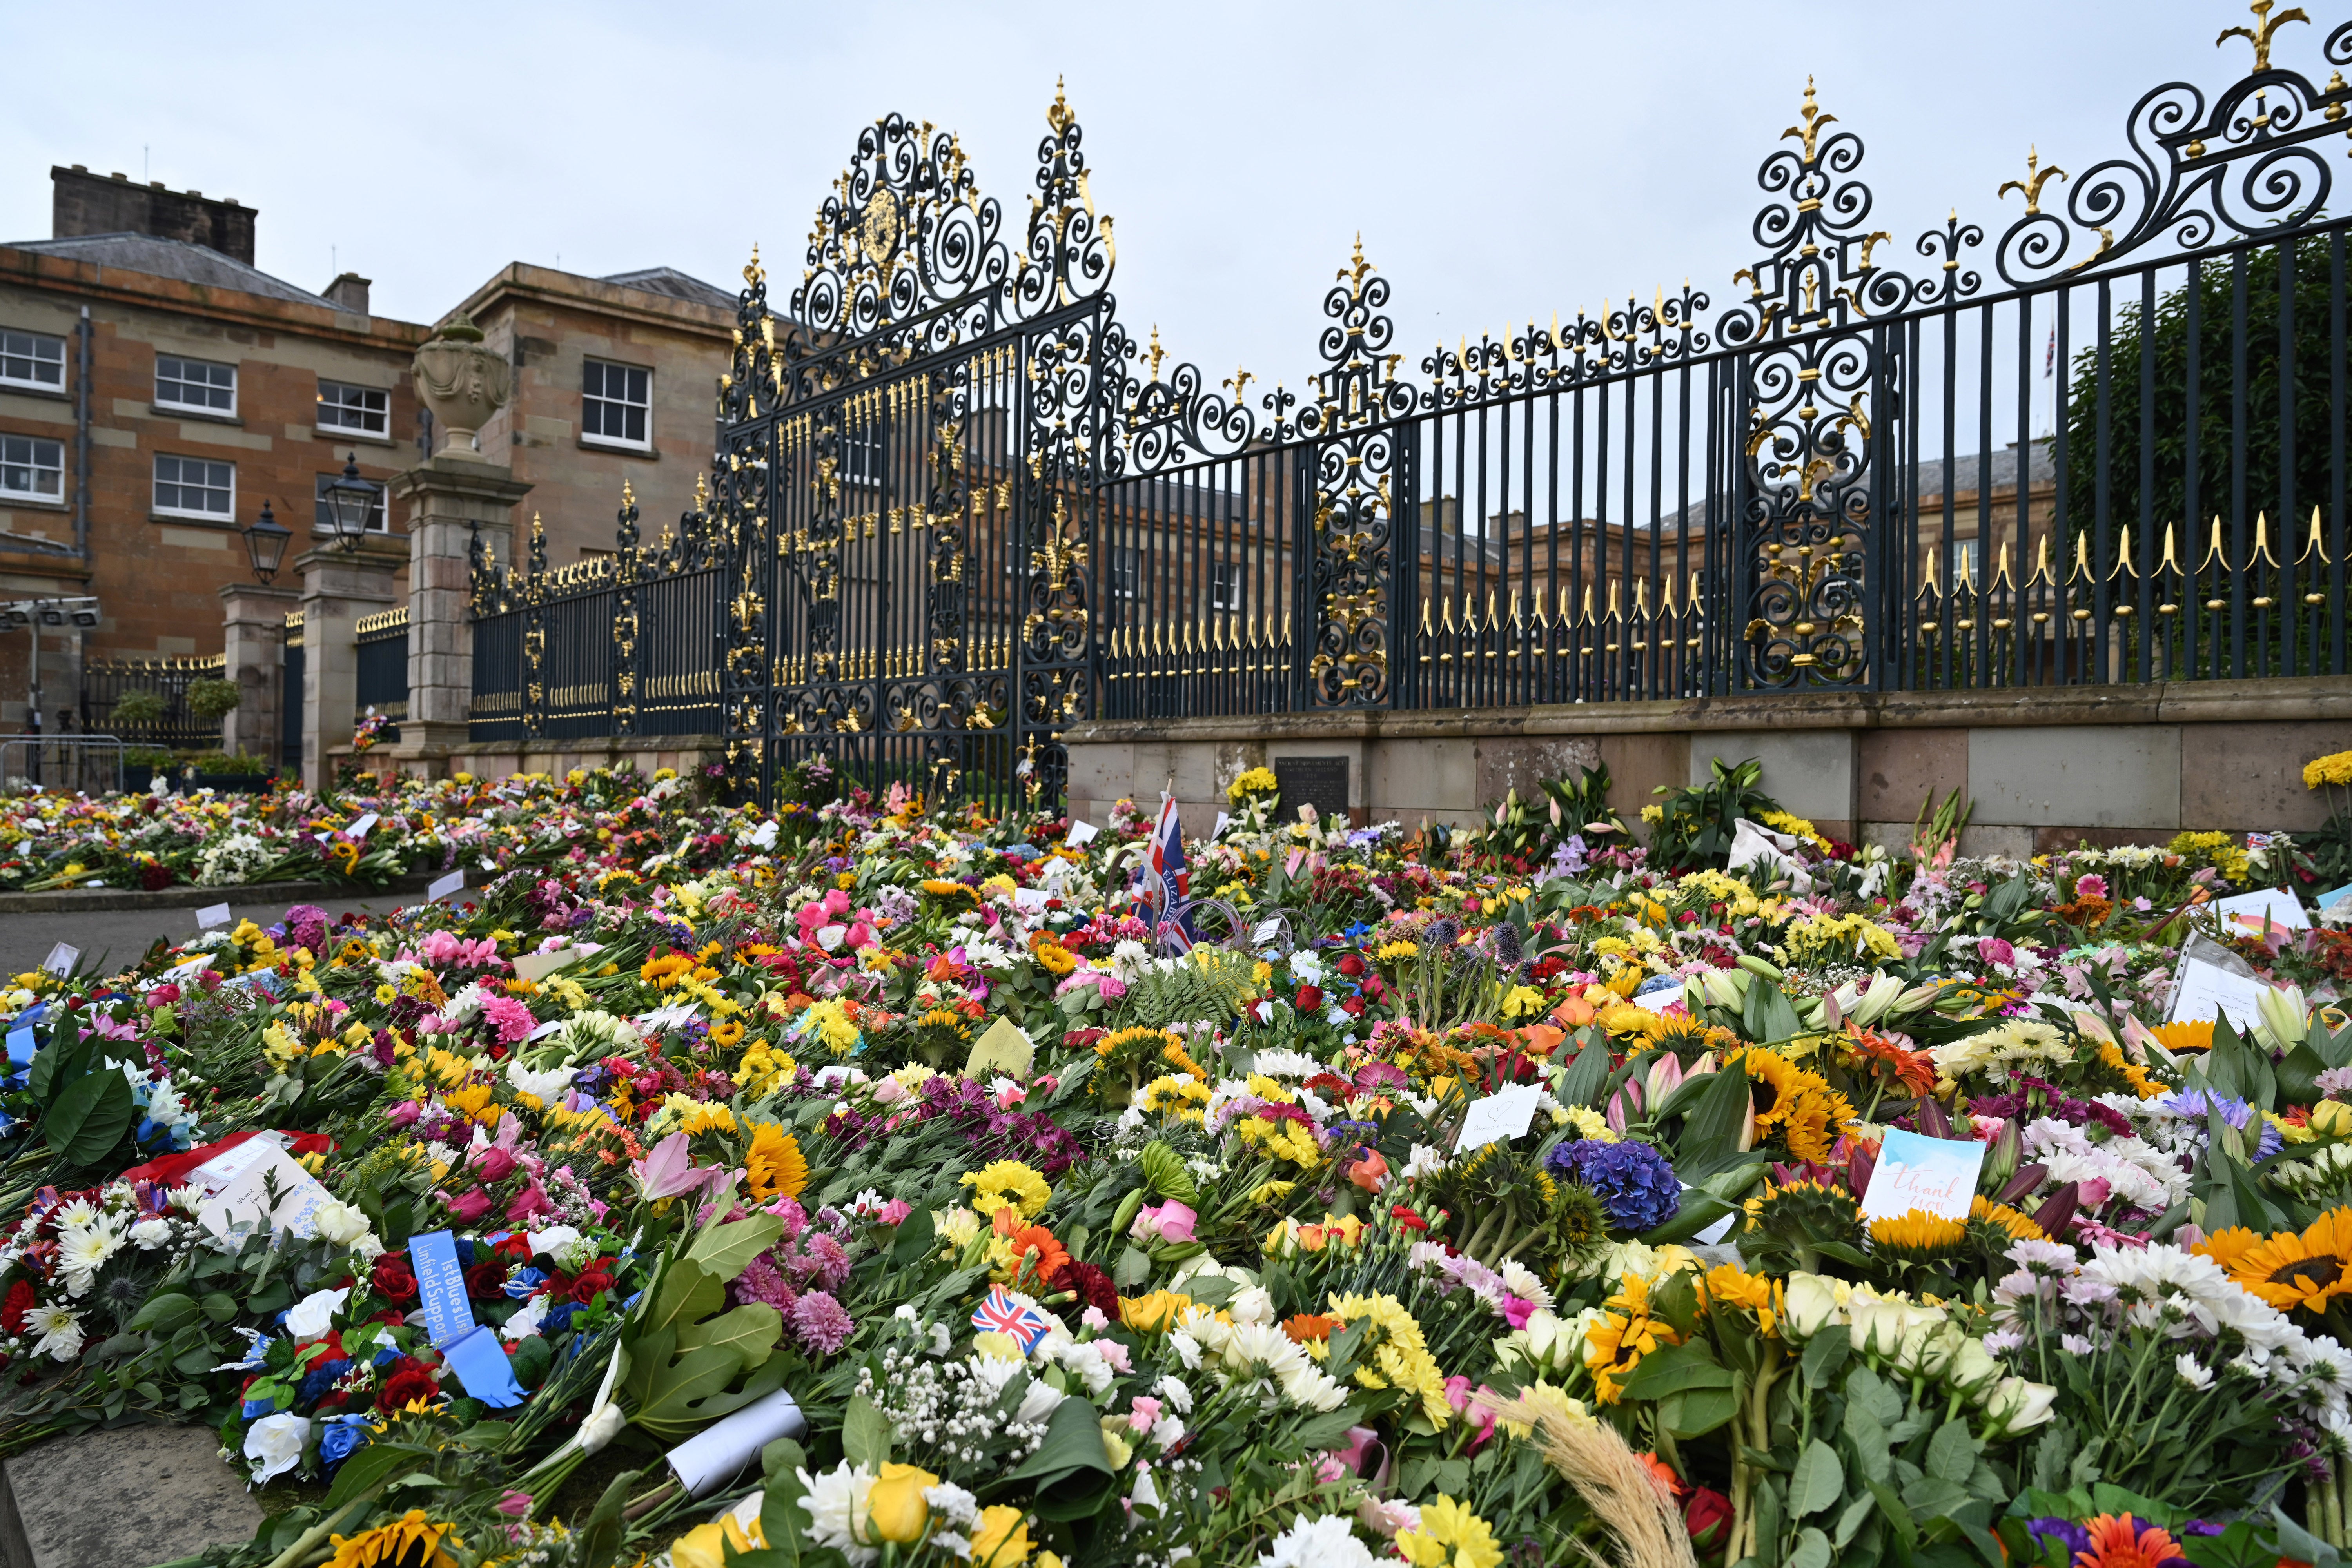 Floral tributes to the Queen outside Hillsborough Castle, Co Down, Northern Ireland ahead of a visit by King Charles III and the Queen Consort (PA)